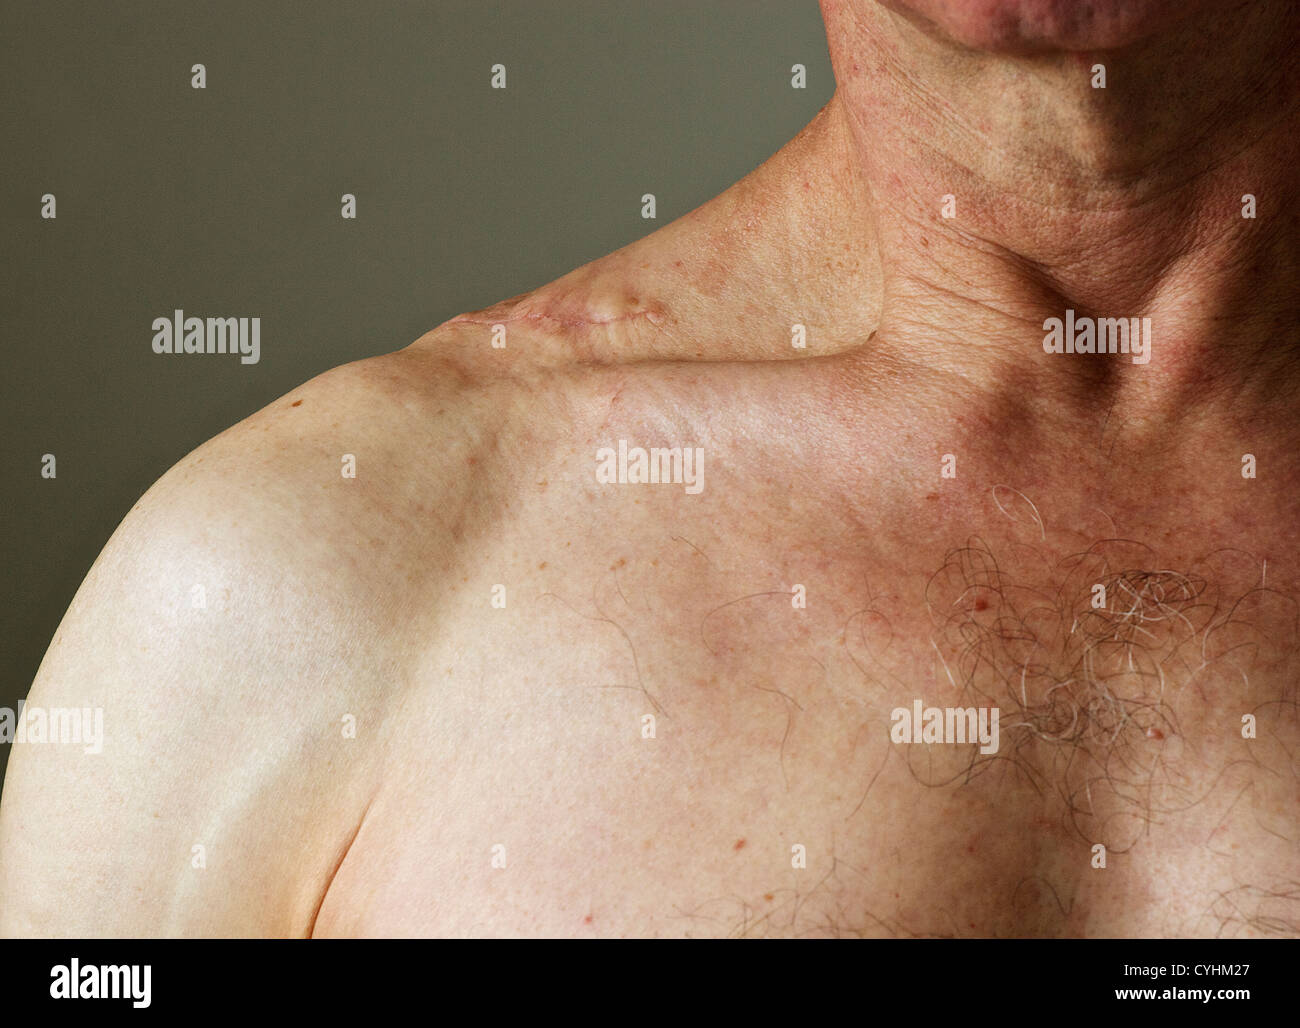 Scar on middle-aged male's shoulder from where a large lipoma has been surgically removed. Stock Photo